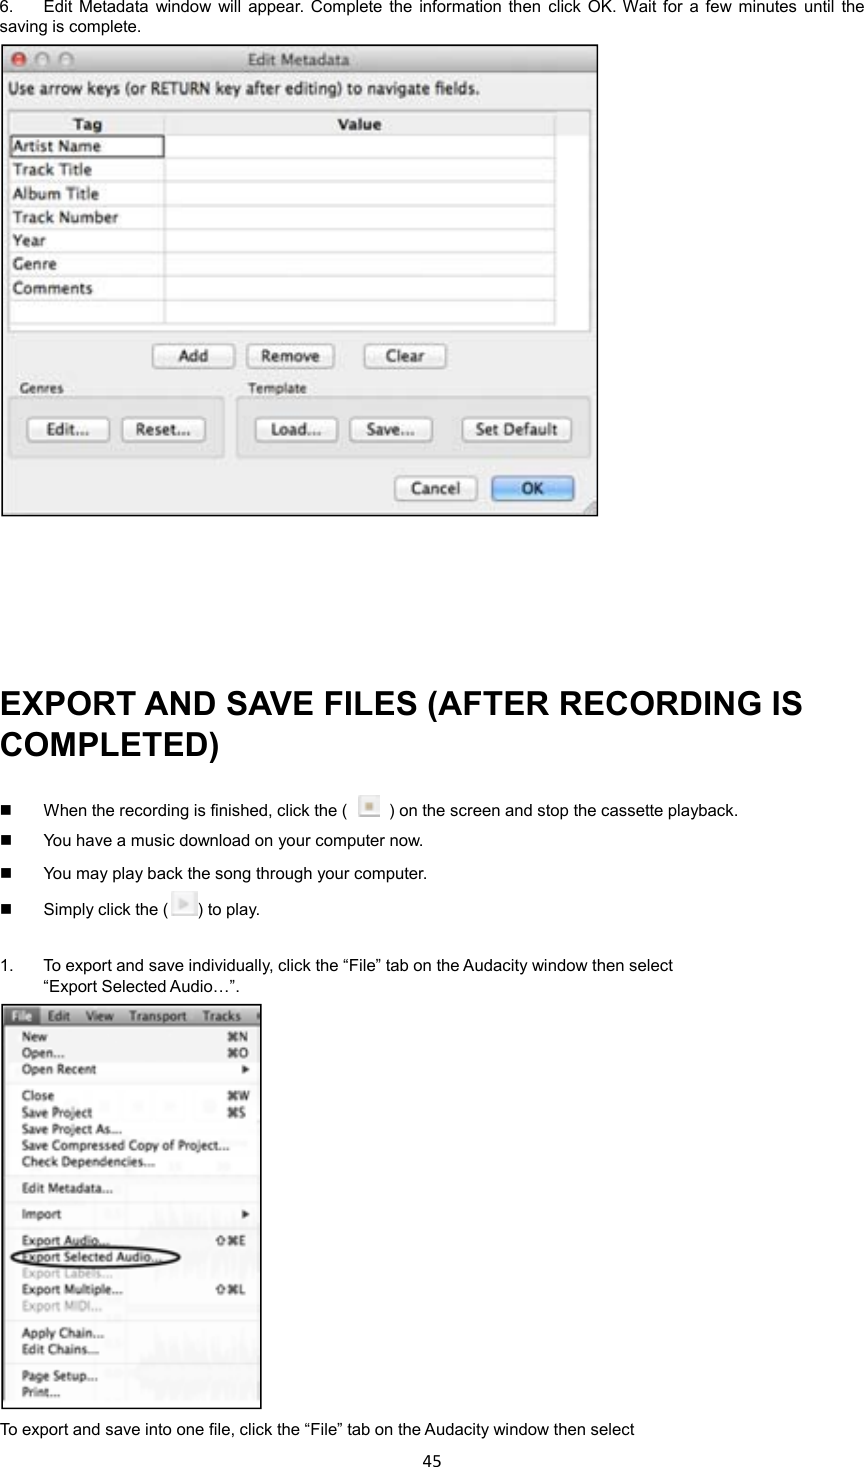 45    6.  Edit  Metadata  window  will  appear.  Complete the  information then  click OK. Wait  for  a  few  minutes  until  the saving is complete.      EXPORT AND SAVE FILES (AFTER RECORDING IS COMPLETED)   When the recording is finished, click the (    ) on the screen and stop the cassette playback.   You have a music download on your computer now.     You may play back the song through your computer.   Simply click the ( ) to play.  1.  To export and save individually, click the “File” tab on the Audacity window then select “Export Selected Audio…”.  To export and save into one file, click the “File” tab on the Audacity window then select 